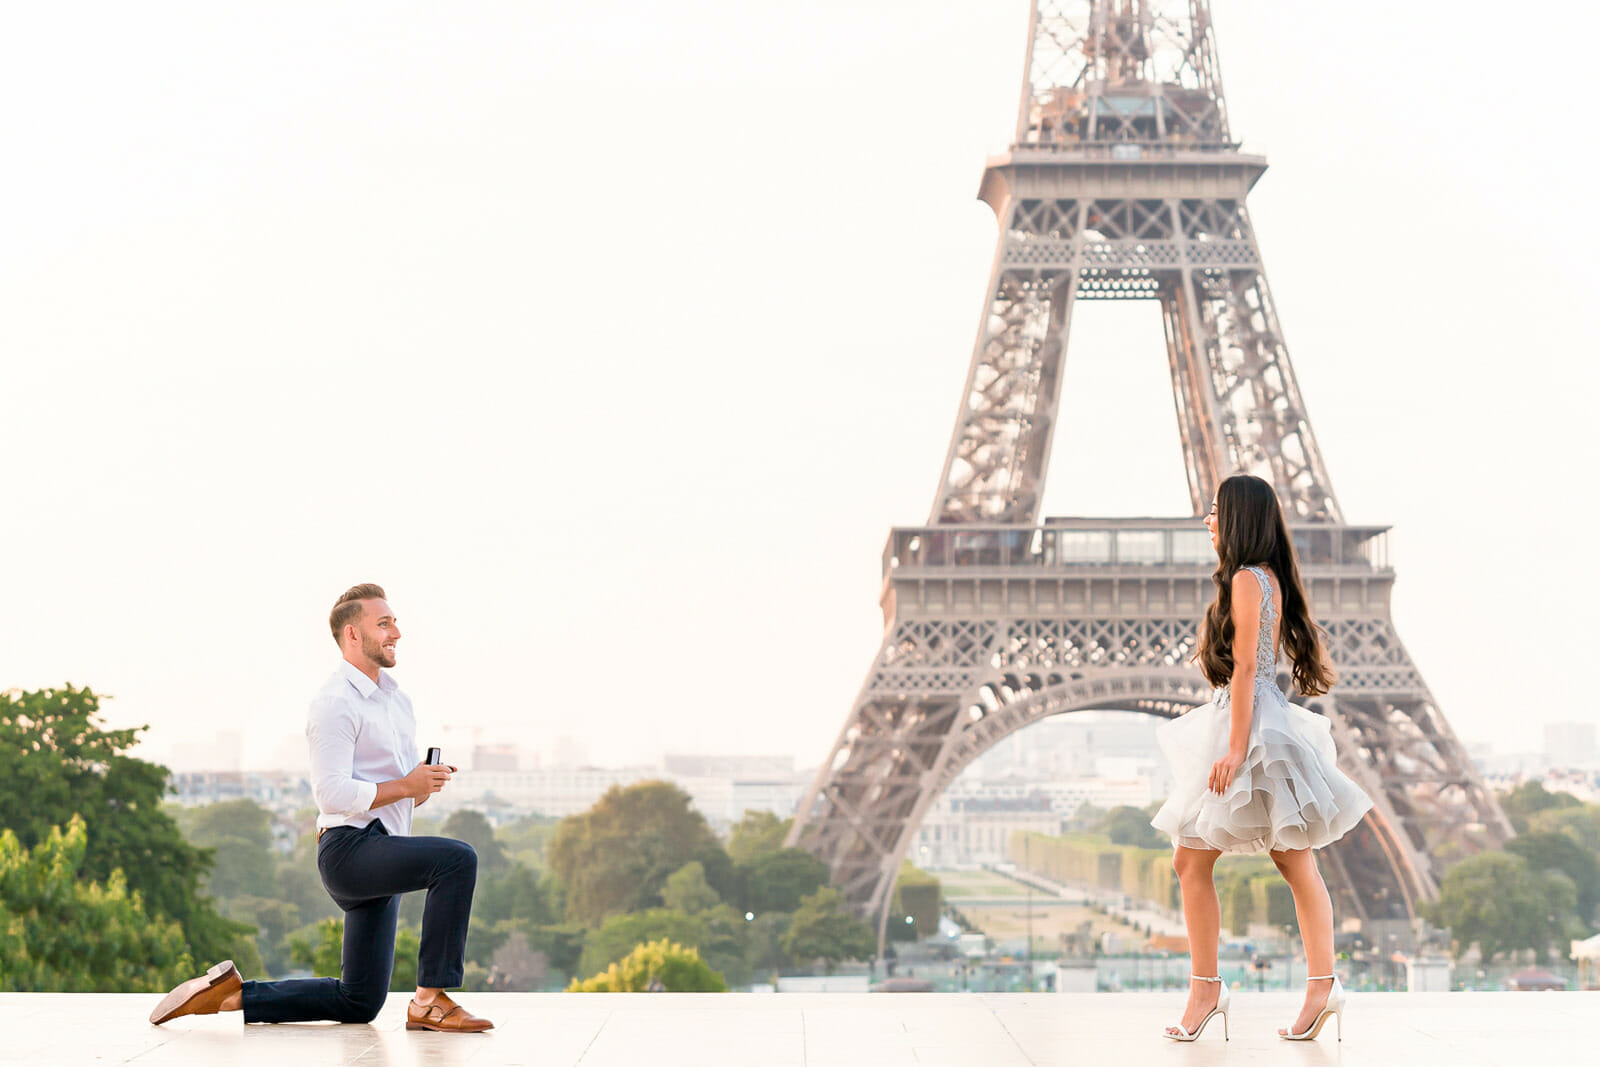 Surprise marriage proposal at the Eiffel Tower at sunrise by Cengiz